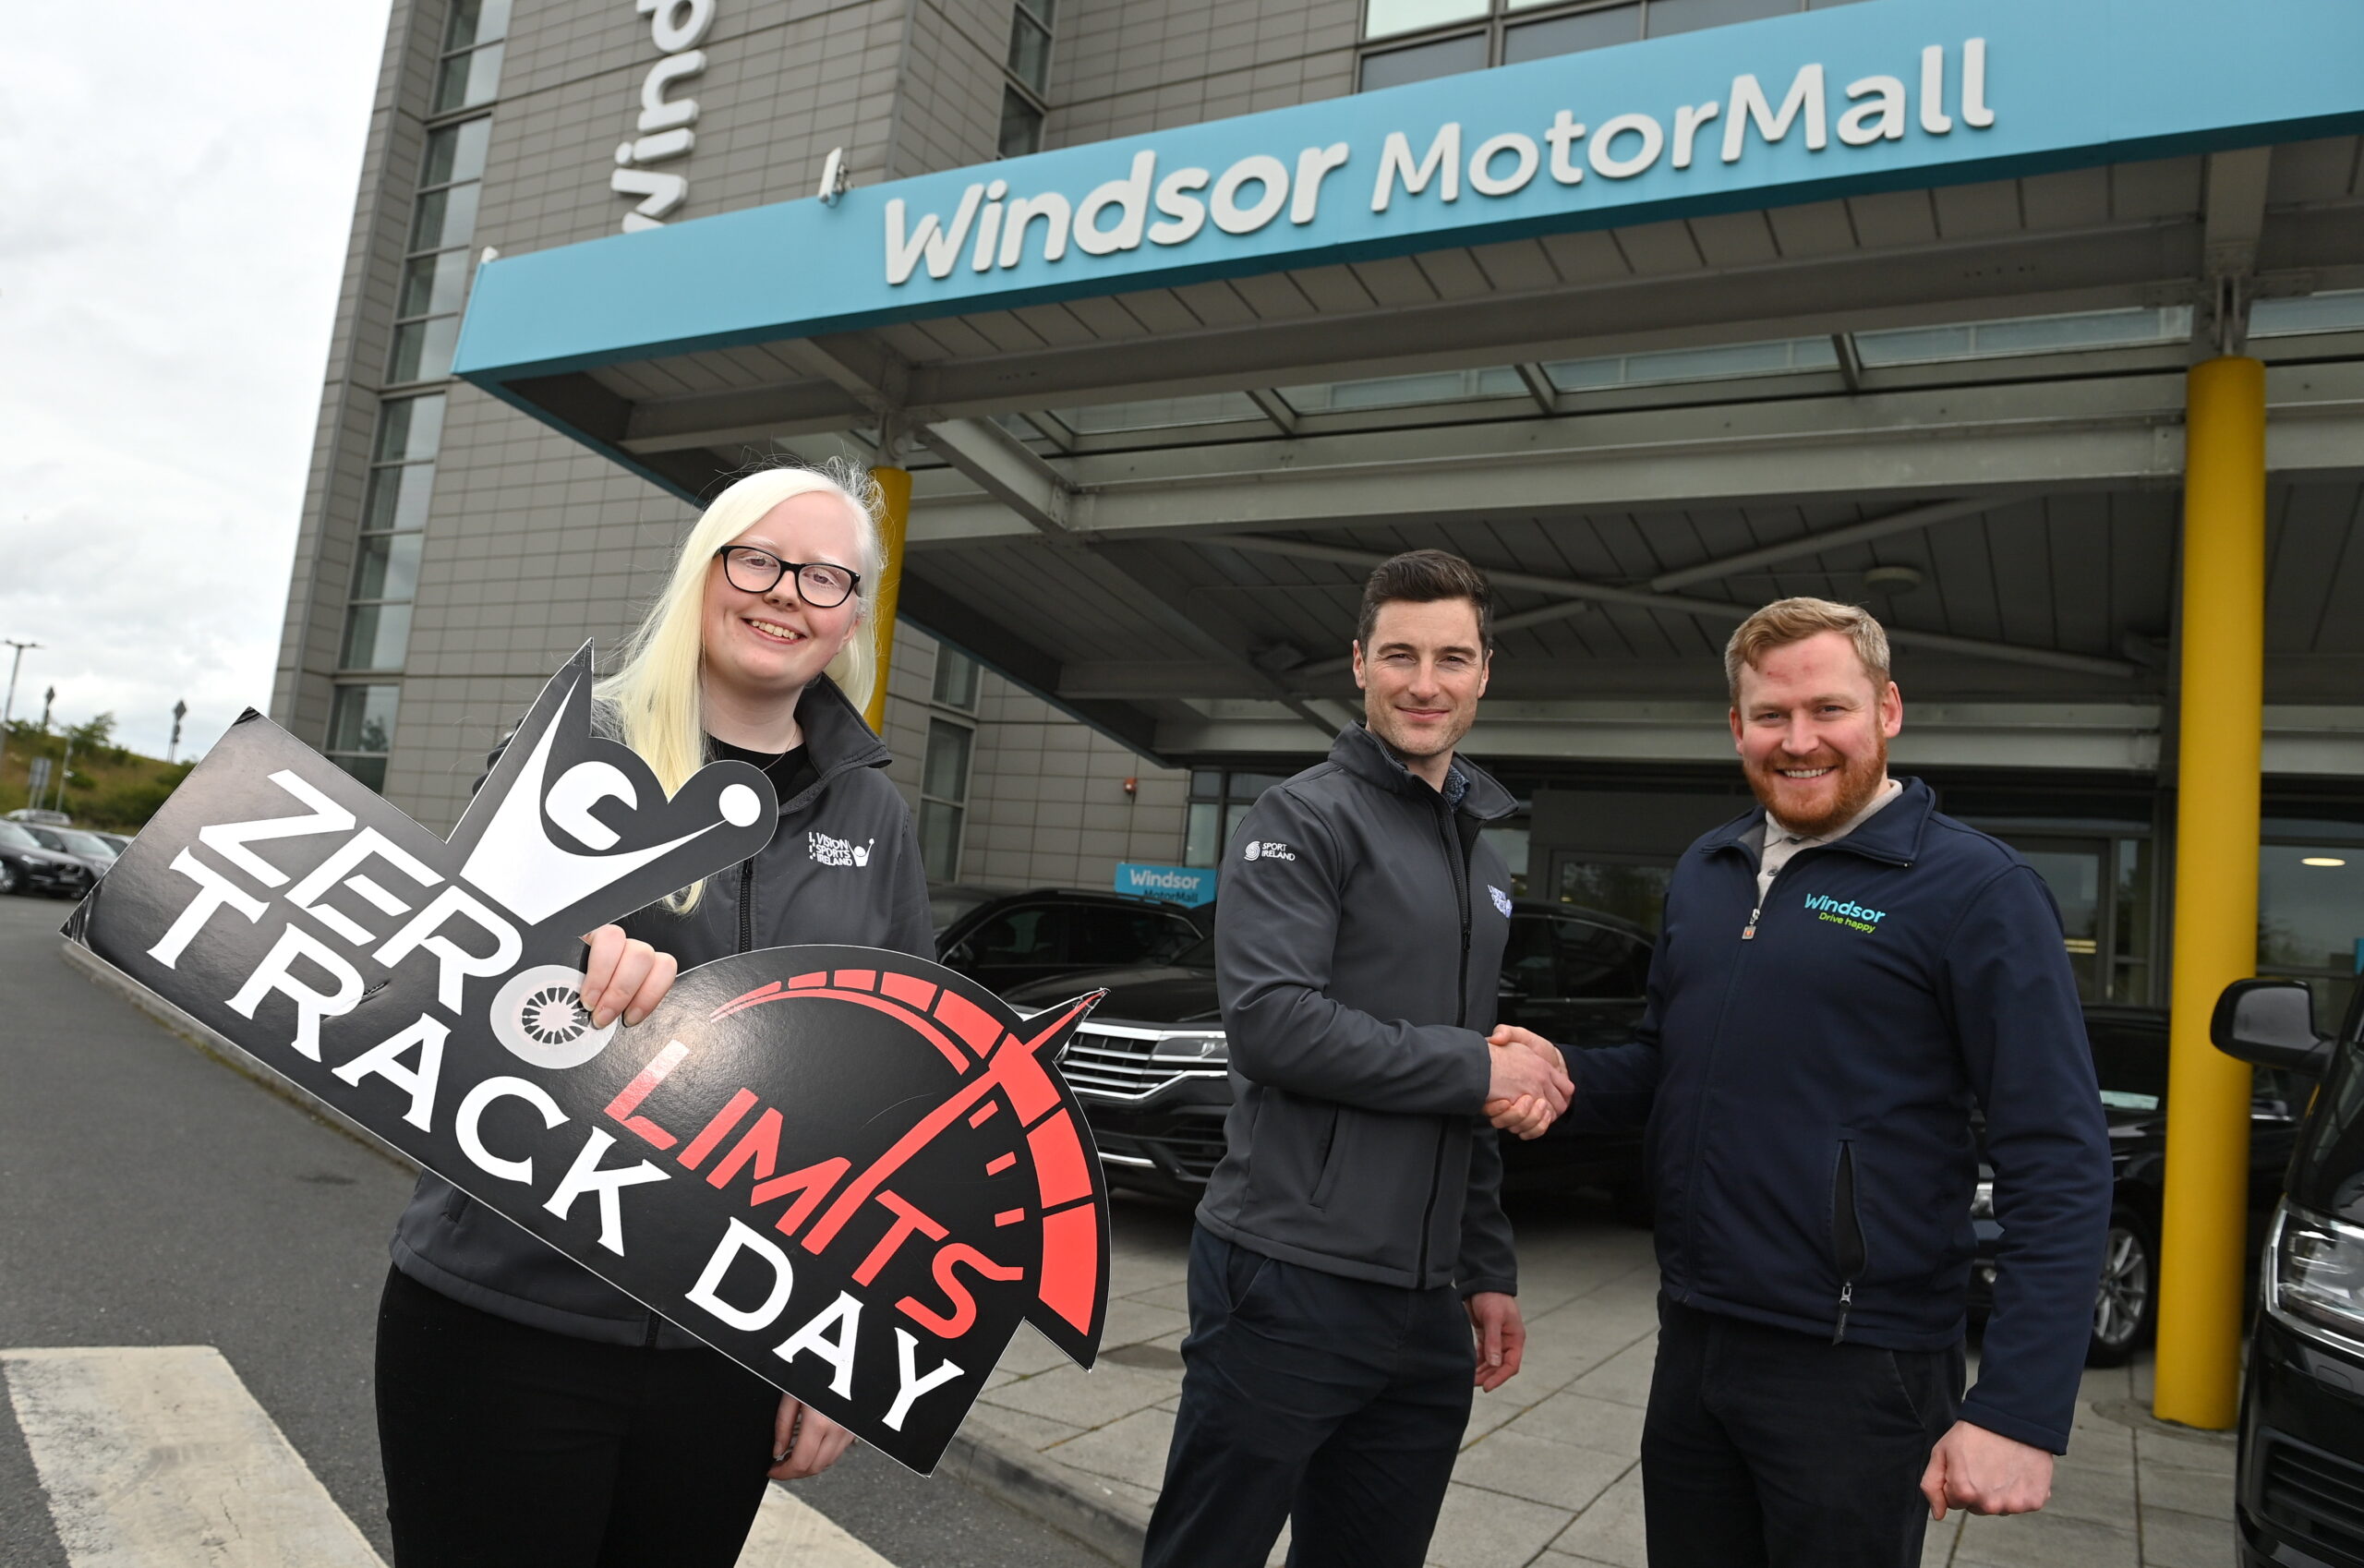 Zero Limits launch photo of 3 people, 2 shaking hands and 1 holding a zero limits logo sign outside Windsor Motor Group